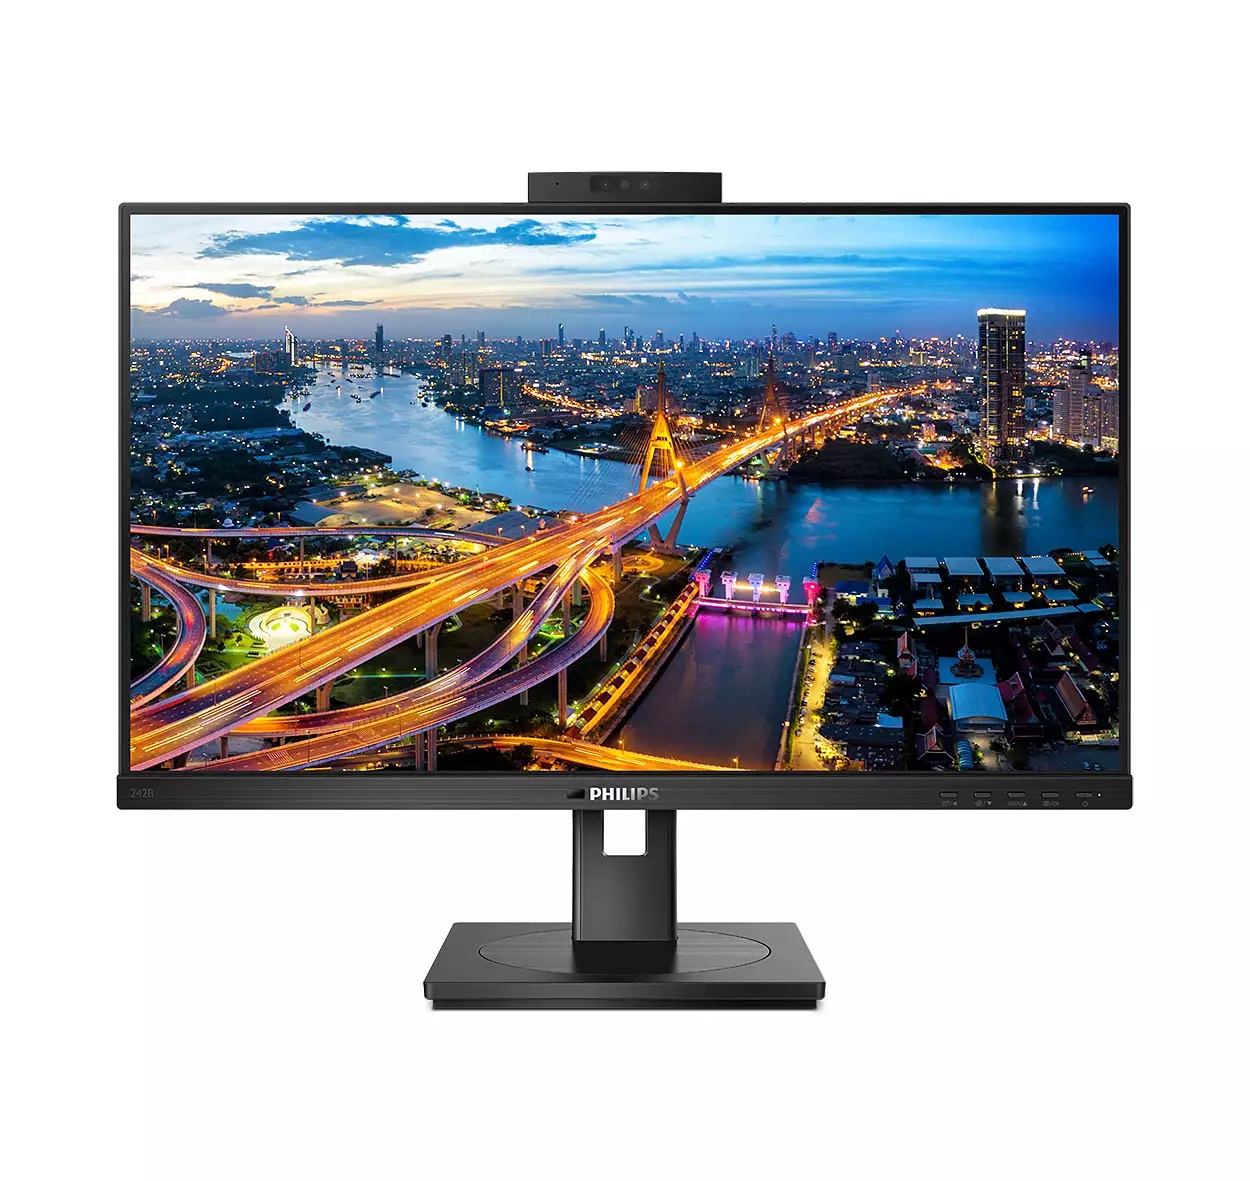 23.8" FHD 1920X1080 75HZ IPS 4MS 16: 9 W-LED MONITOR WITH WINDOWS HELLO WEBCAM VGA/DVI-D/DP/HDMI/USB BUILT-IN SPEAKERS 4yr Wty